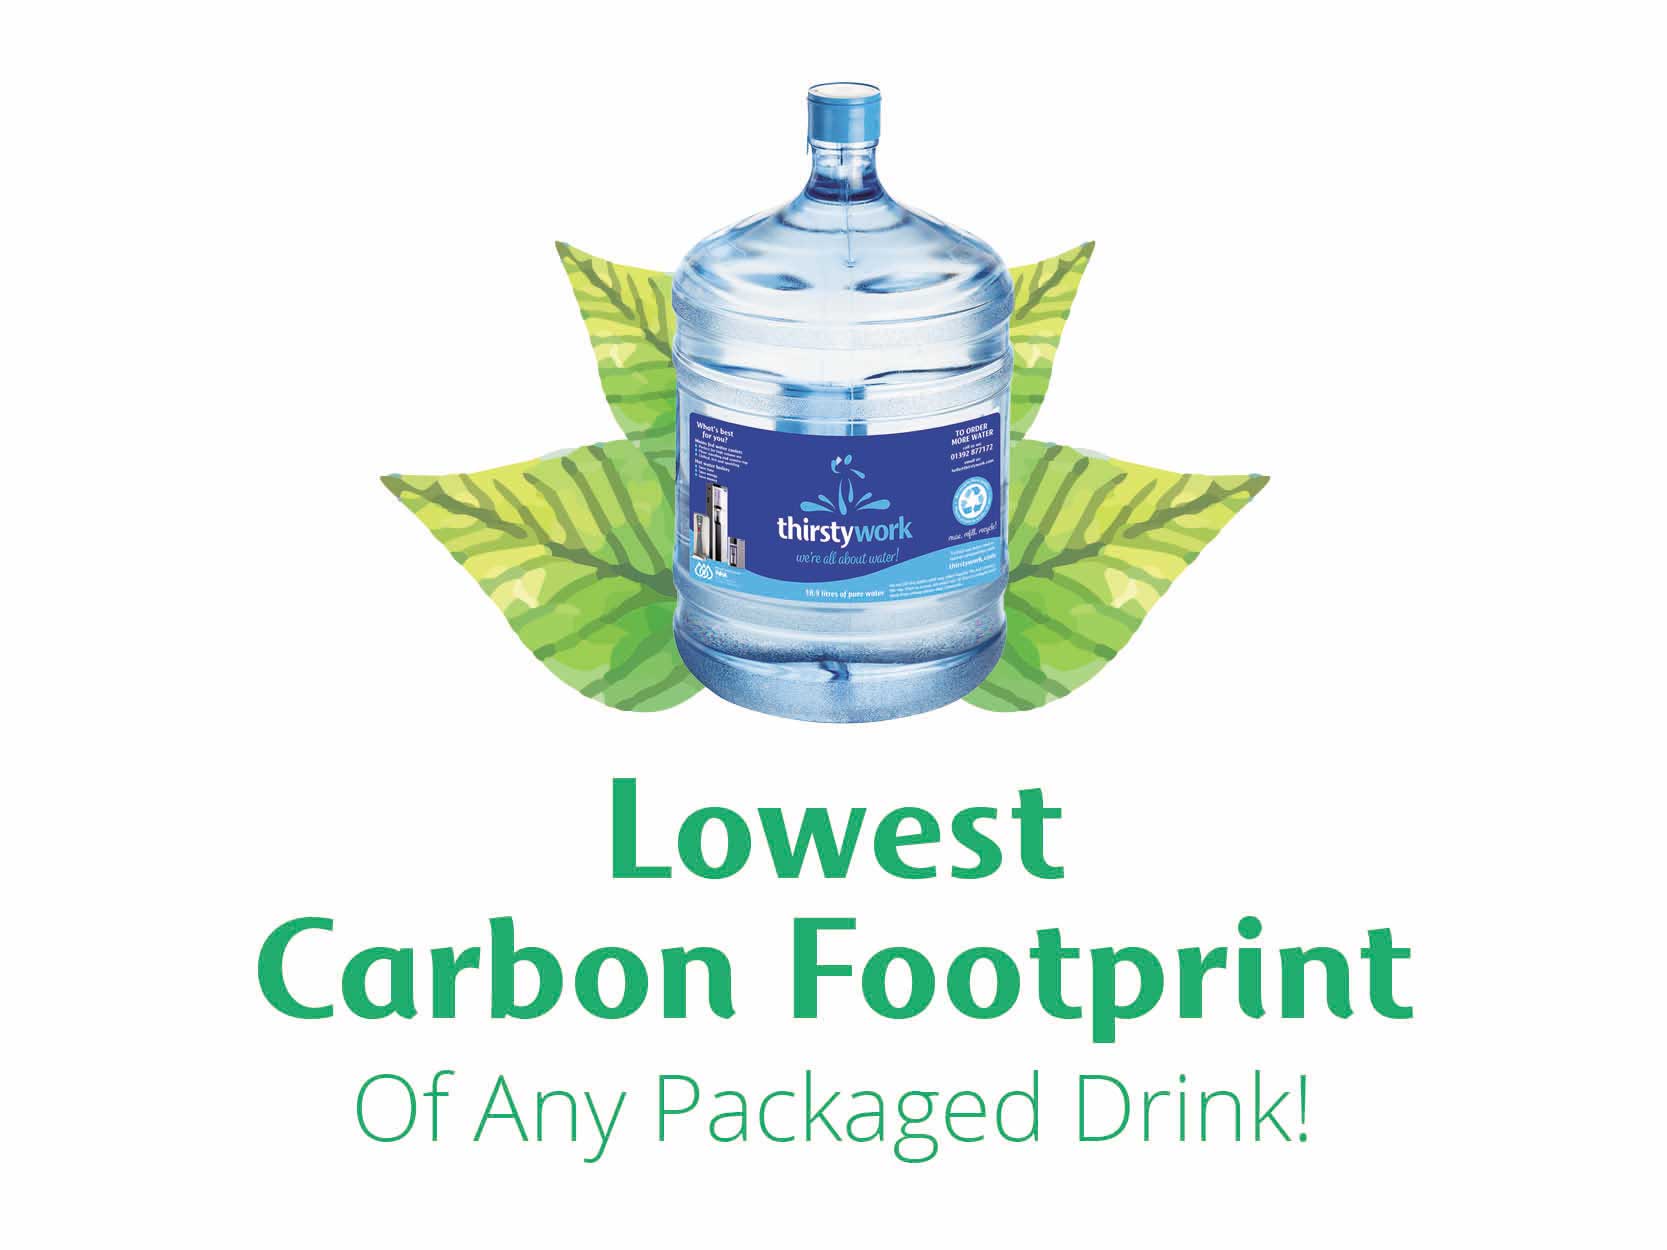 bottled water has the lowest carbon footprint of any packaged drink